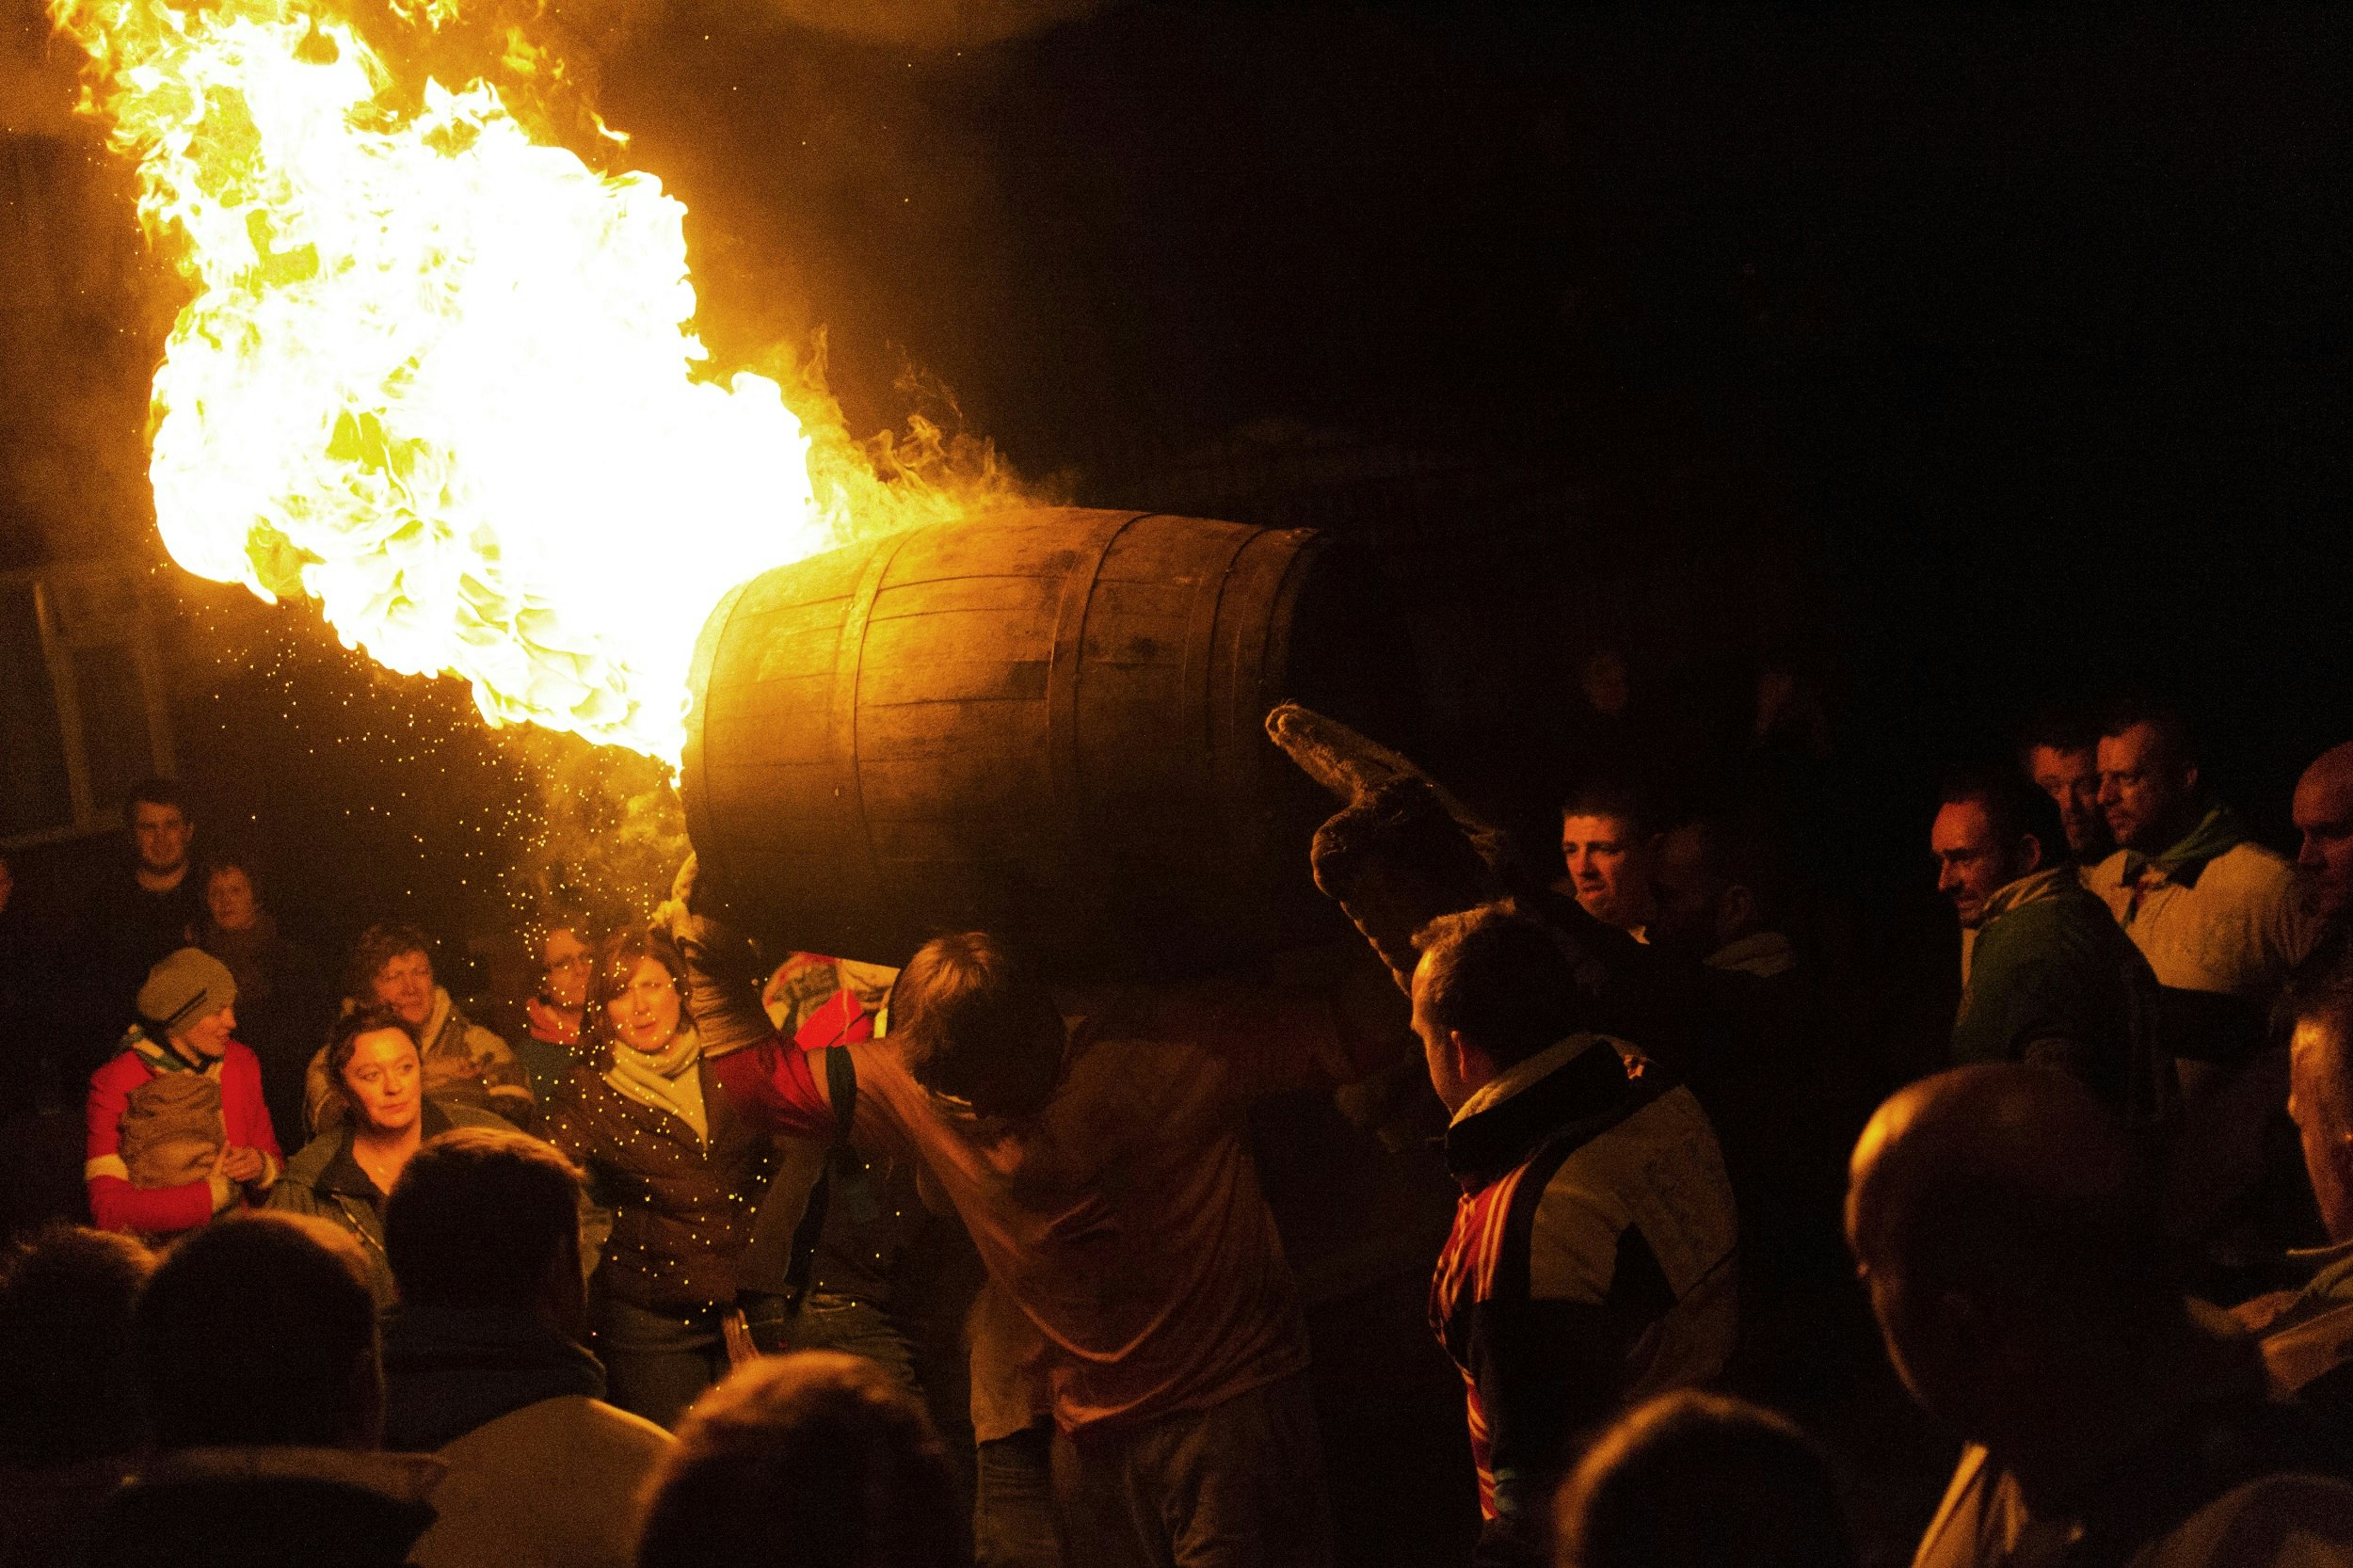 A man has a burning barrel on his shoulders as he walks through a crowd of people